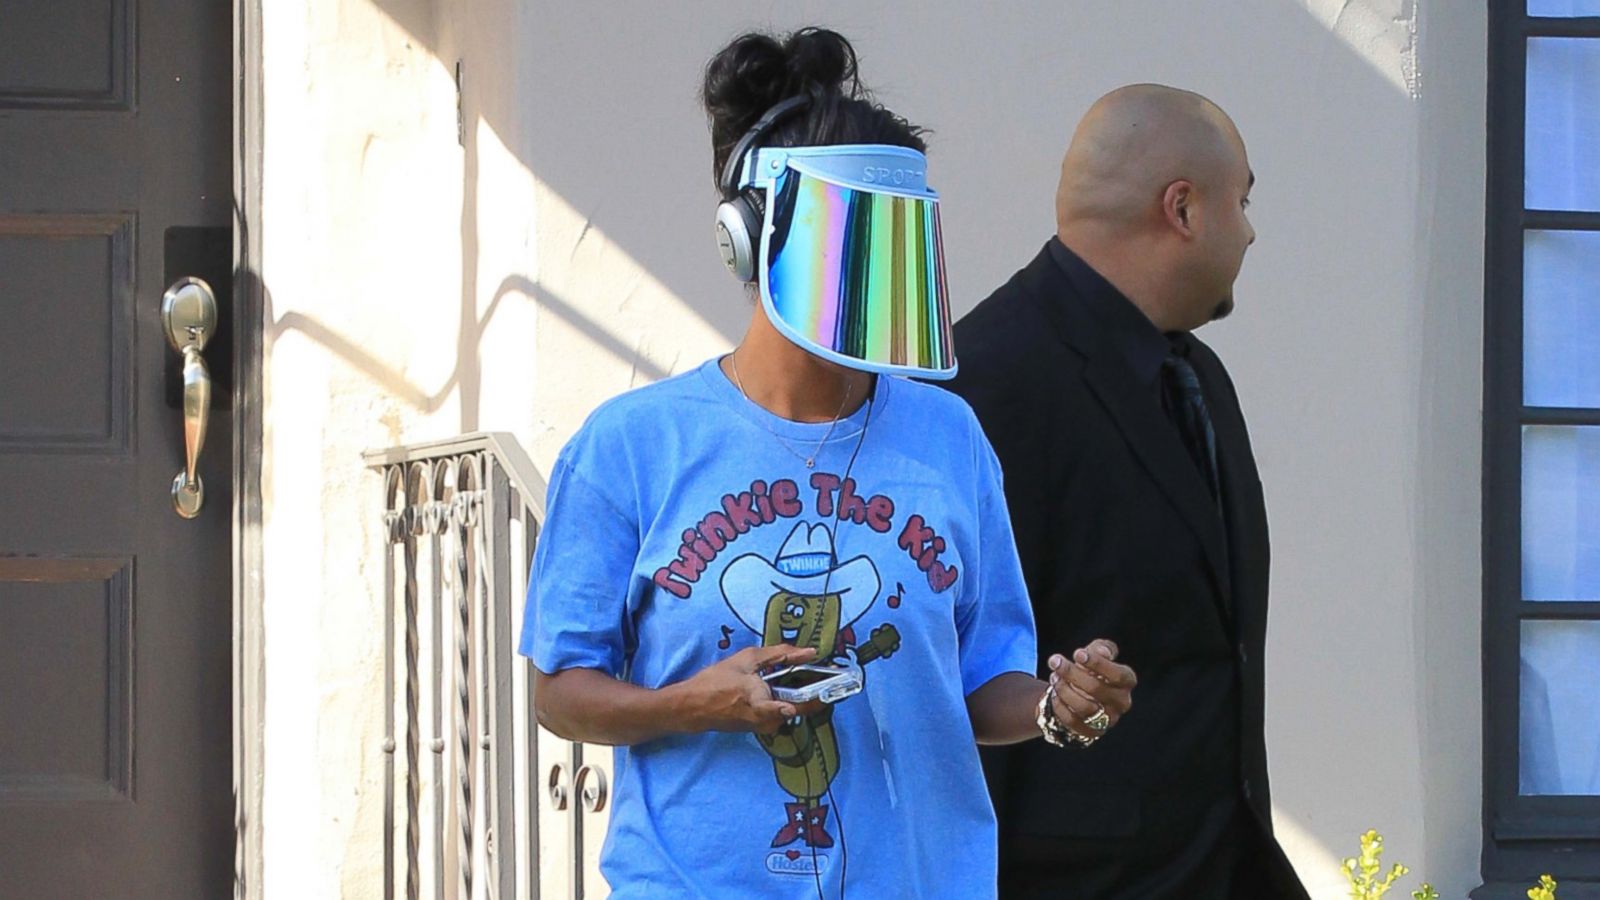 V. Stiviano Says Visor Made It 'Easier to Mask the Pain' - ABC News